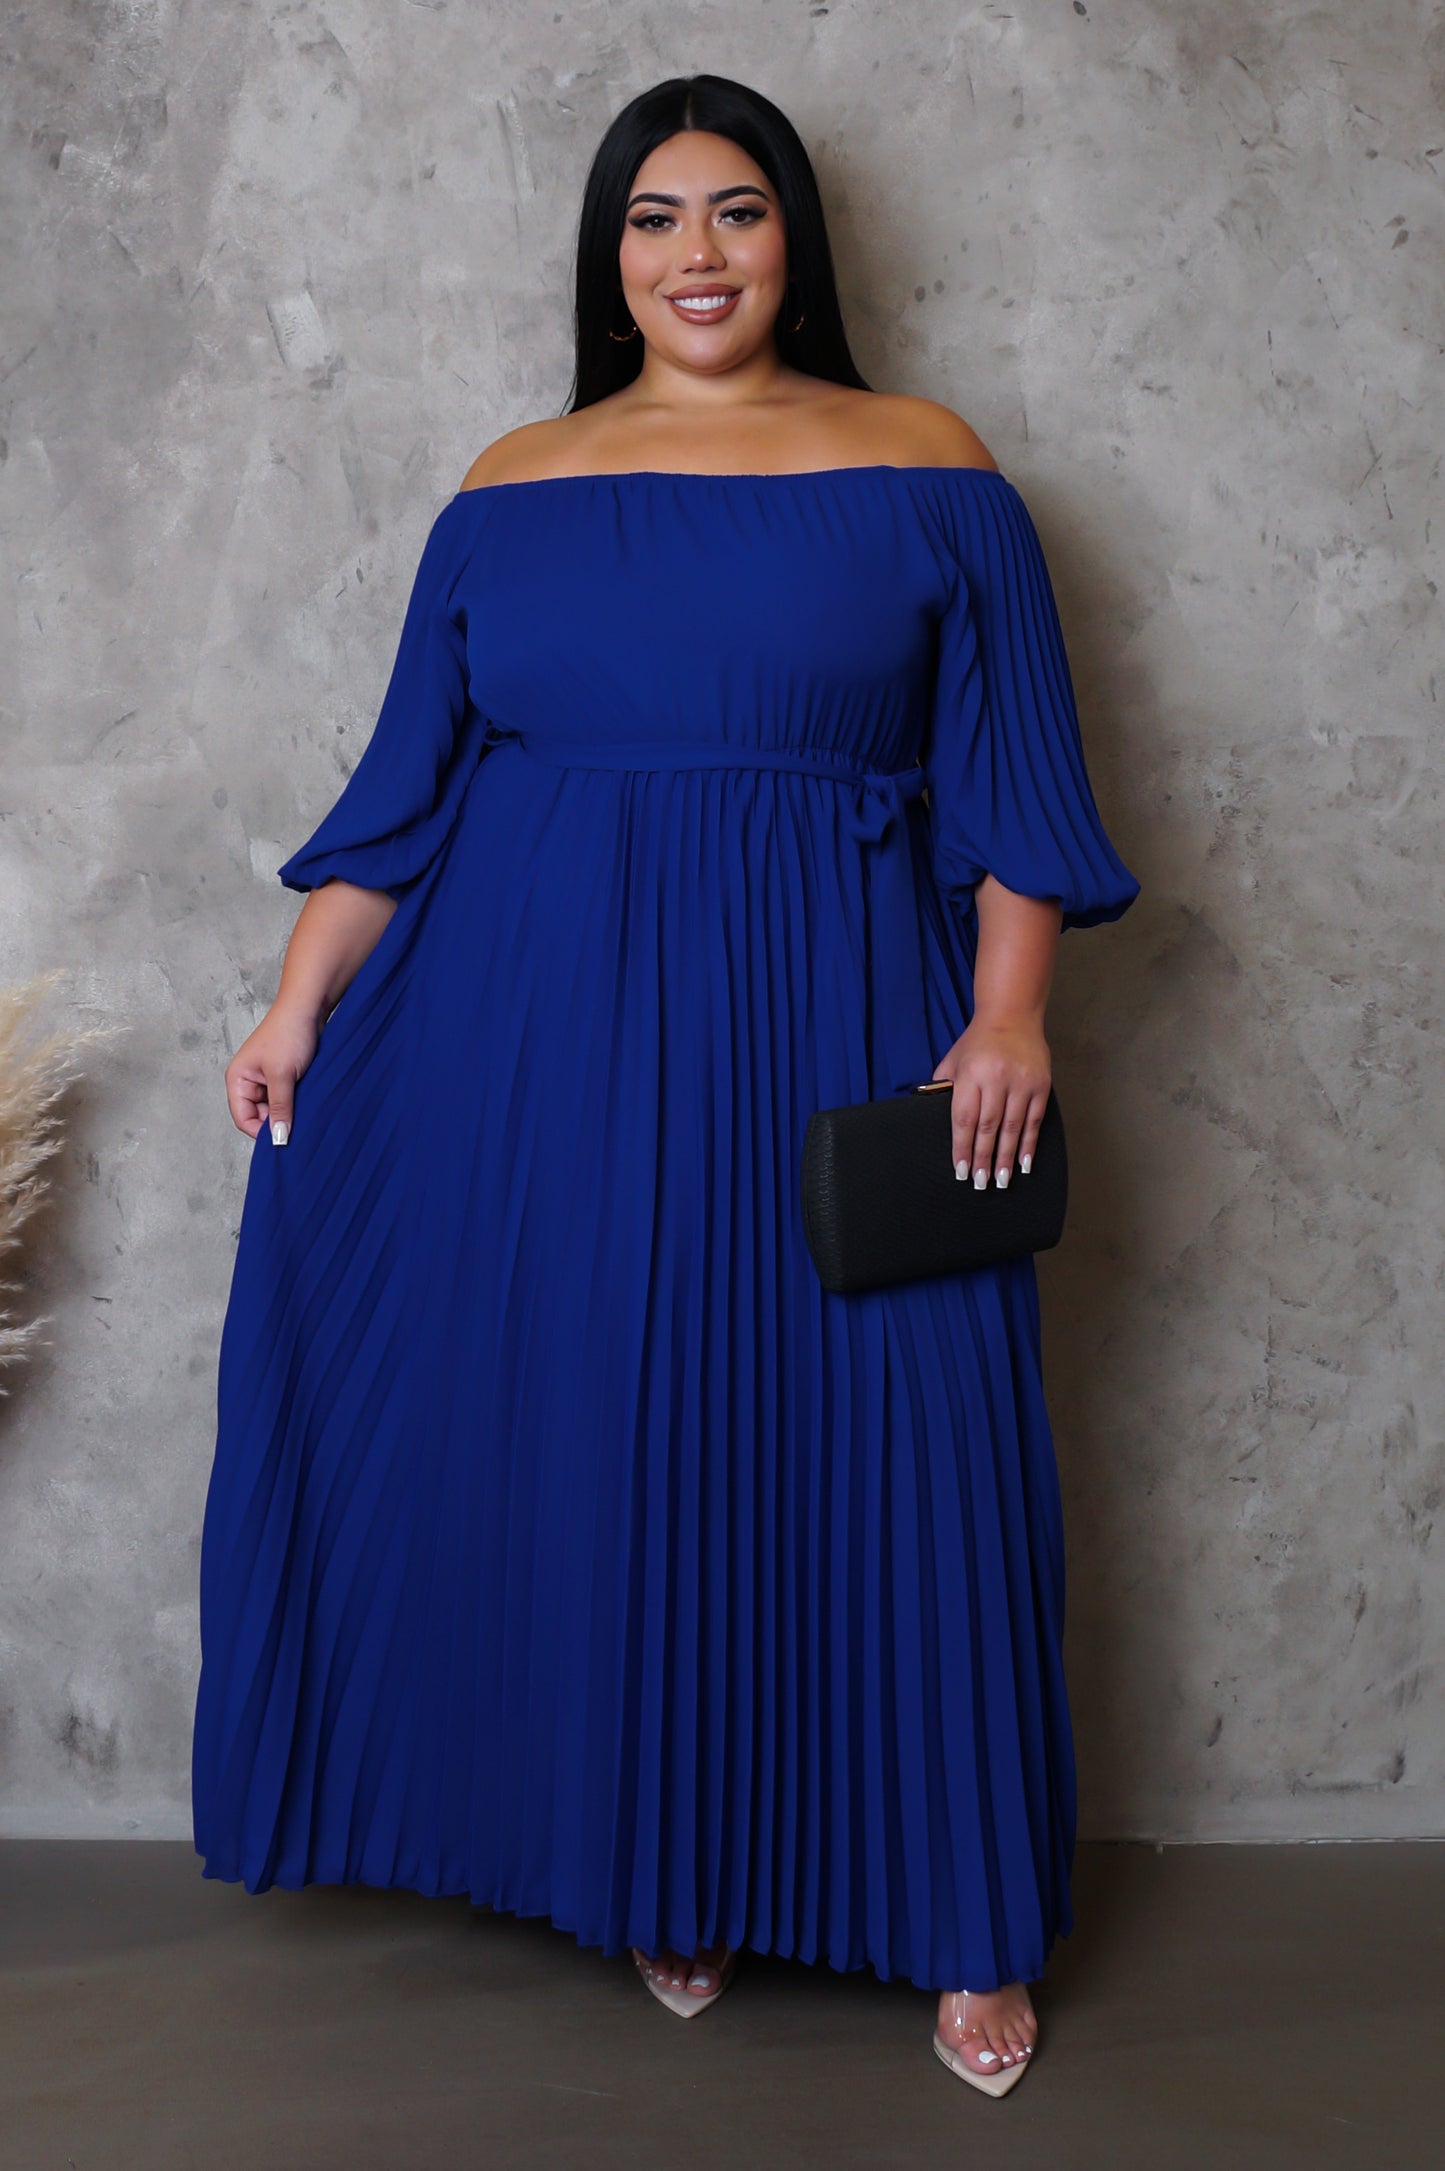 Ready To Go Out Maxi Dress Plus Size - Blue